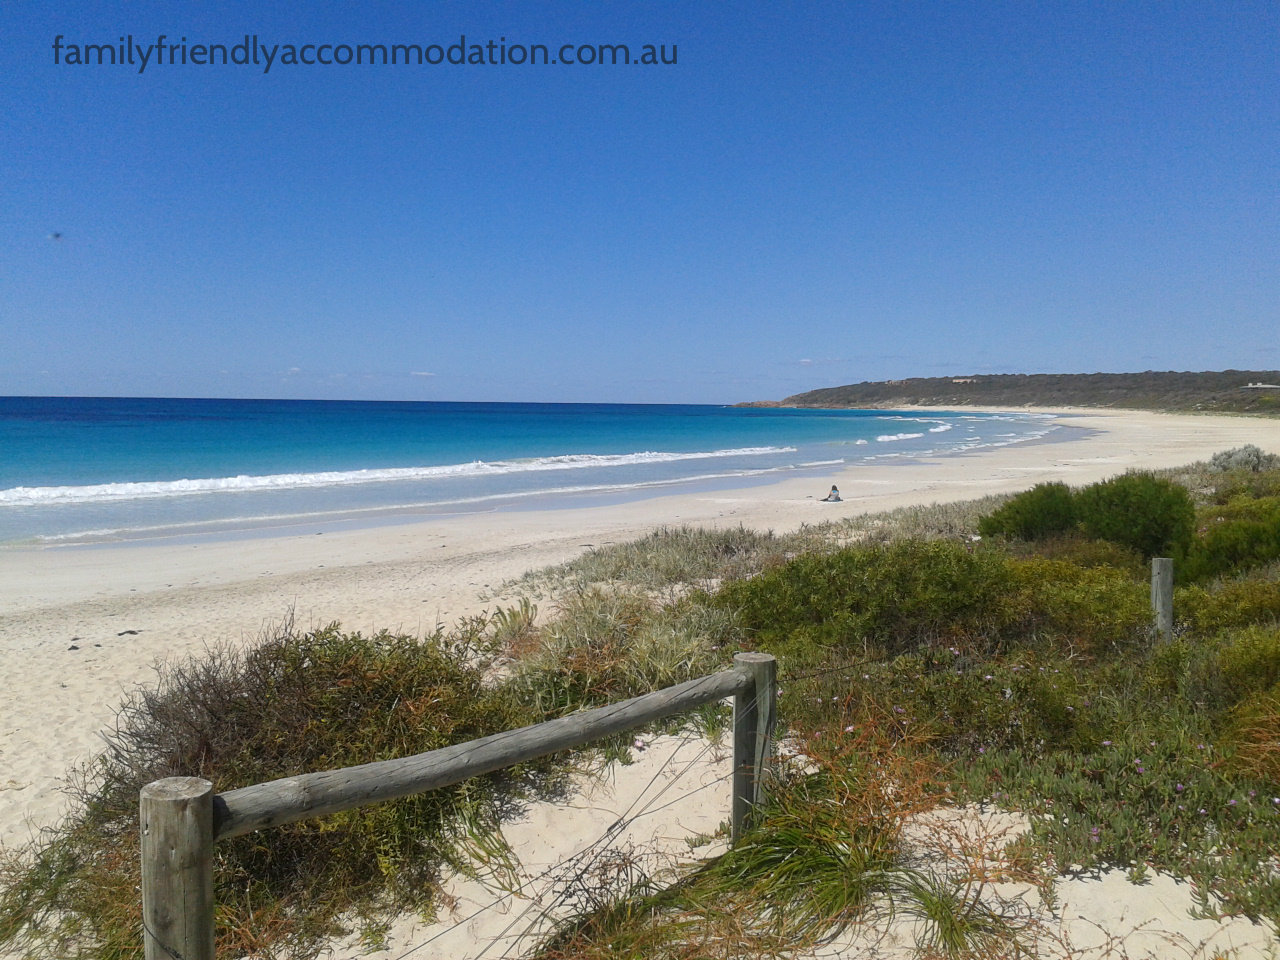 Beautiful Bunker Bay is just one of the spots to discover in South West WA.